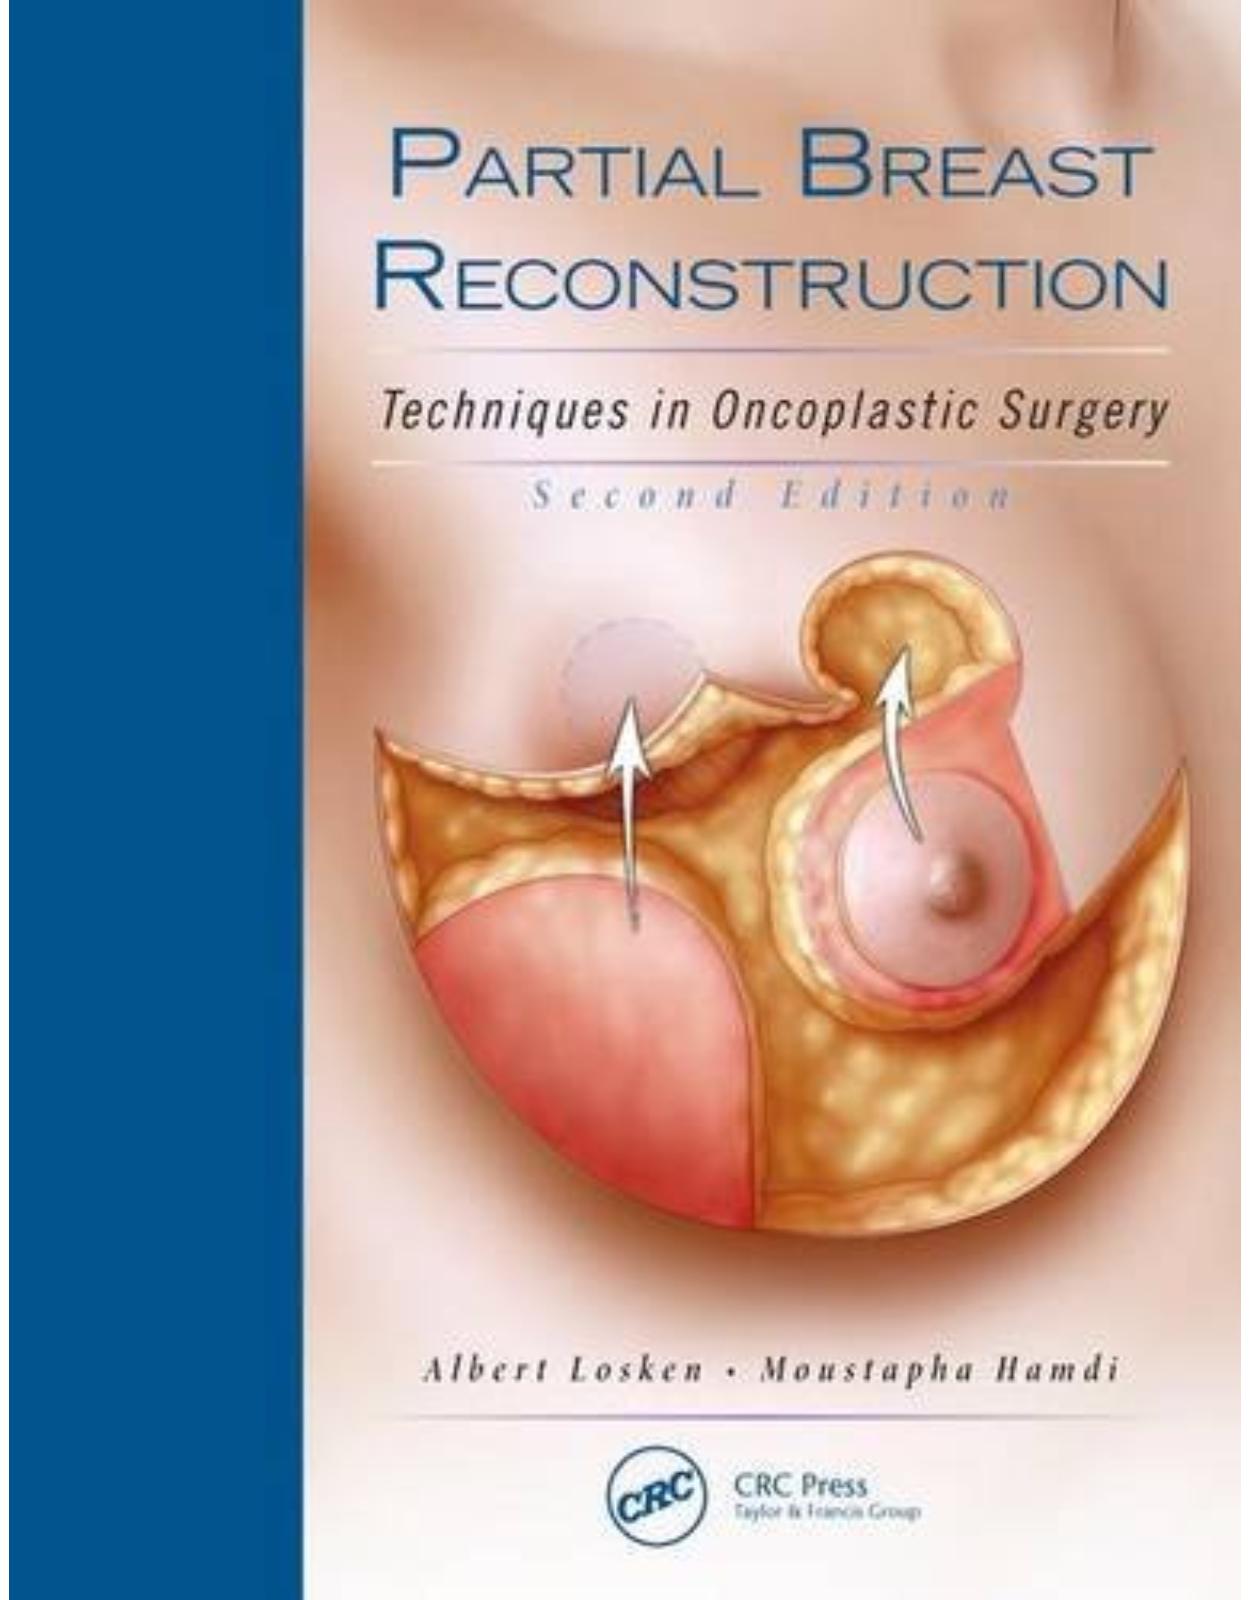 Partial Breast Reconstruction: Techniques in Oncoplastic Surgery, 2nd Edition